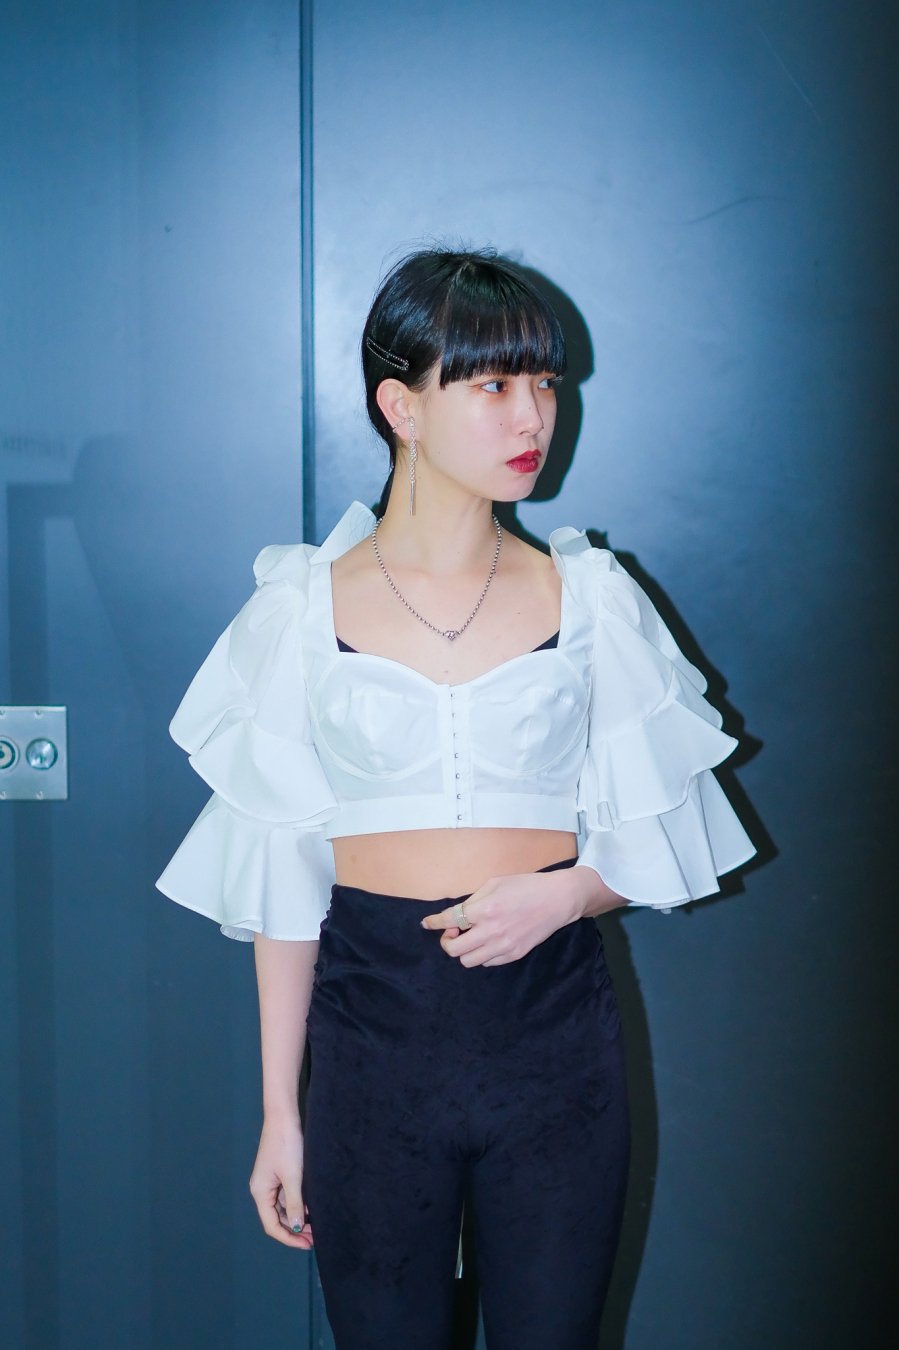 FETICO（フェティコ）のRUFFLED SLEEVE BUSTIER TOP WHITEの通販サイト